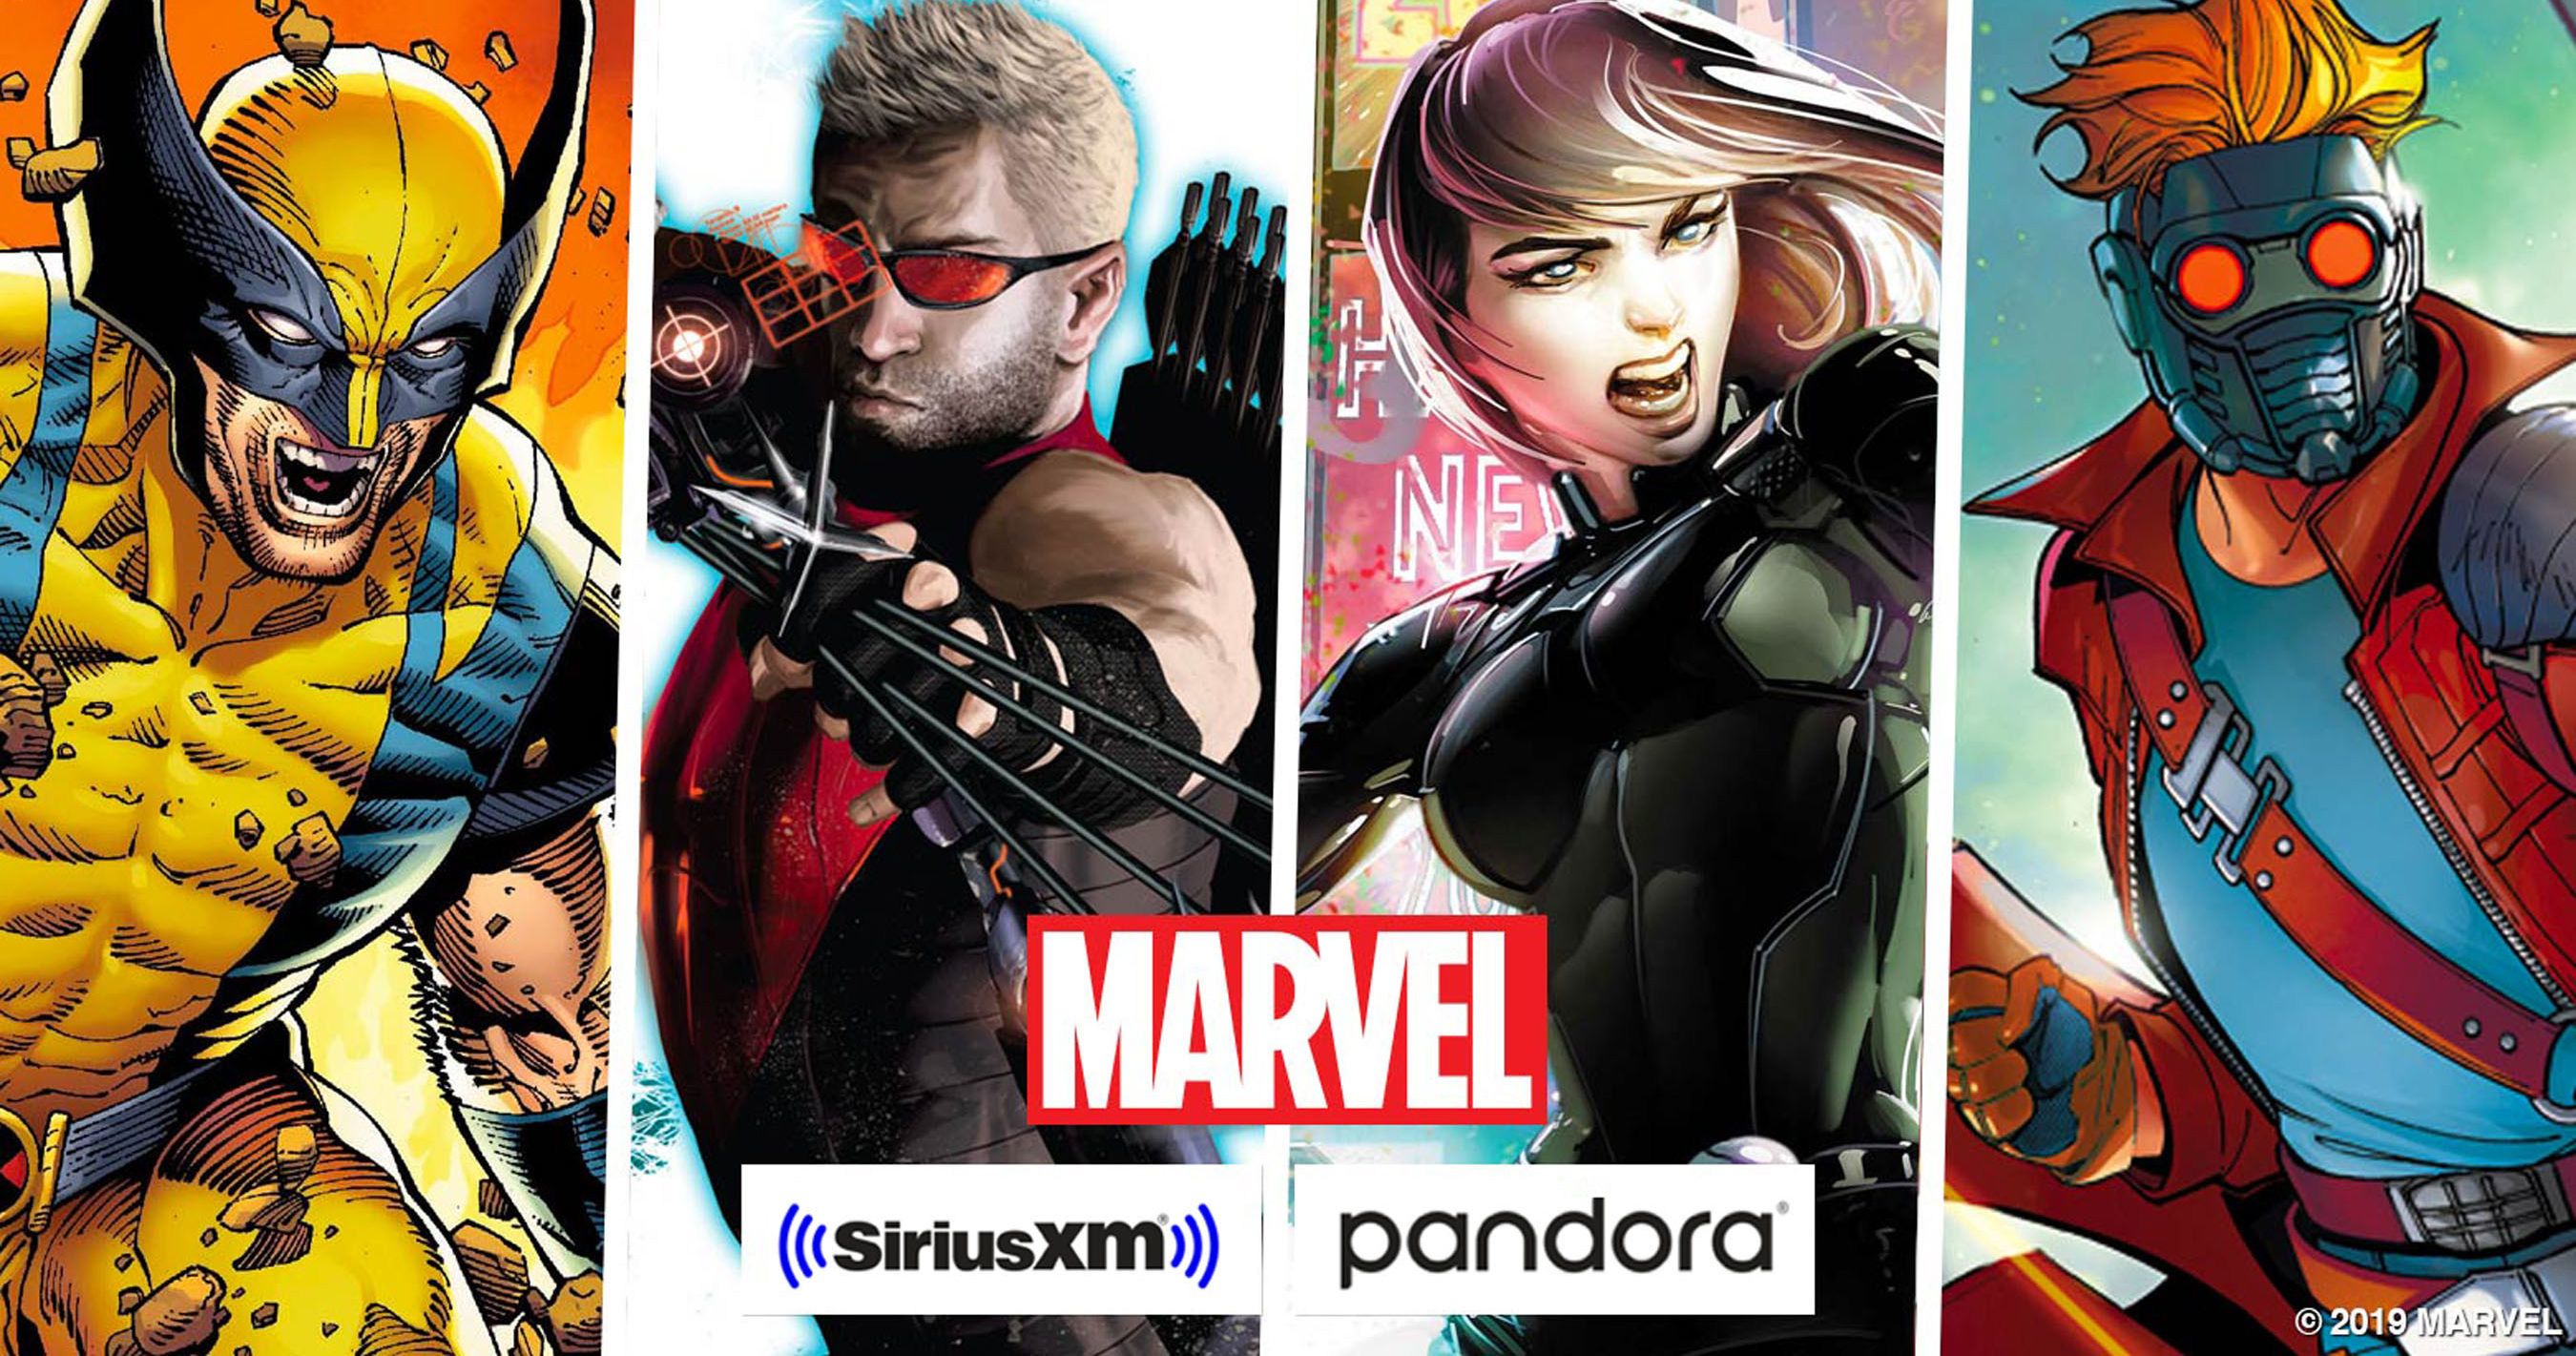 Marvel Podcasts with Wolverine, Black Widow &amp; More Coming to SiriusXM and Pandora